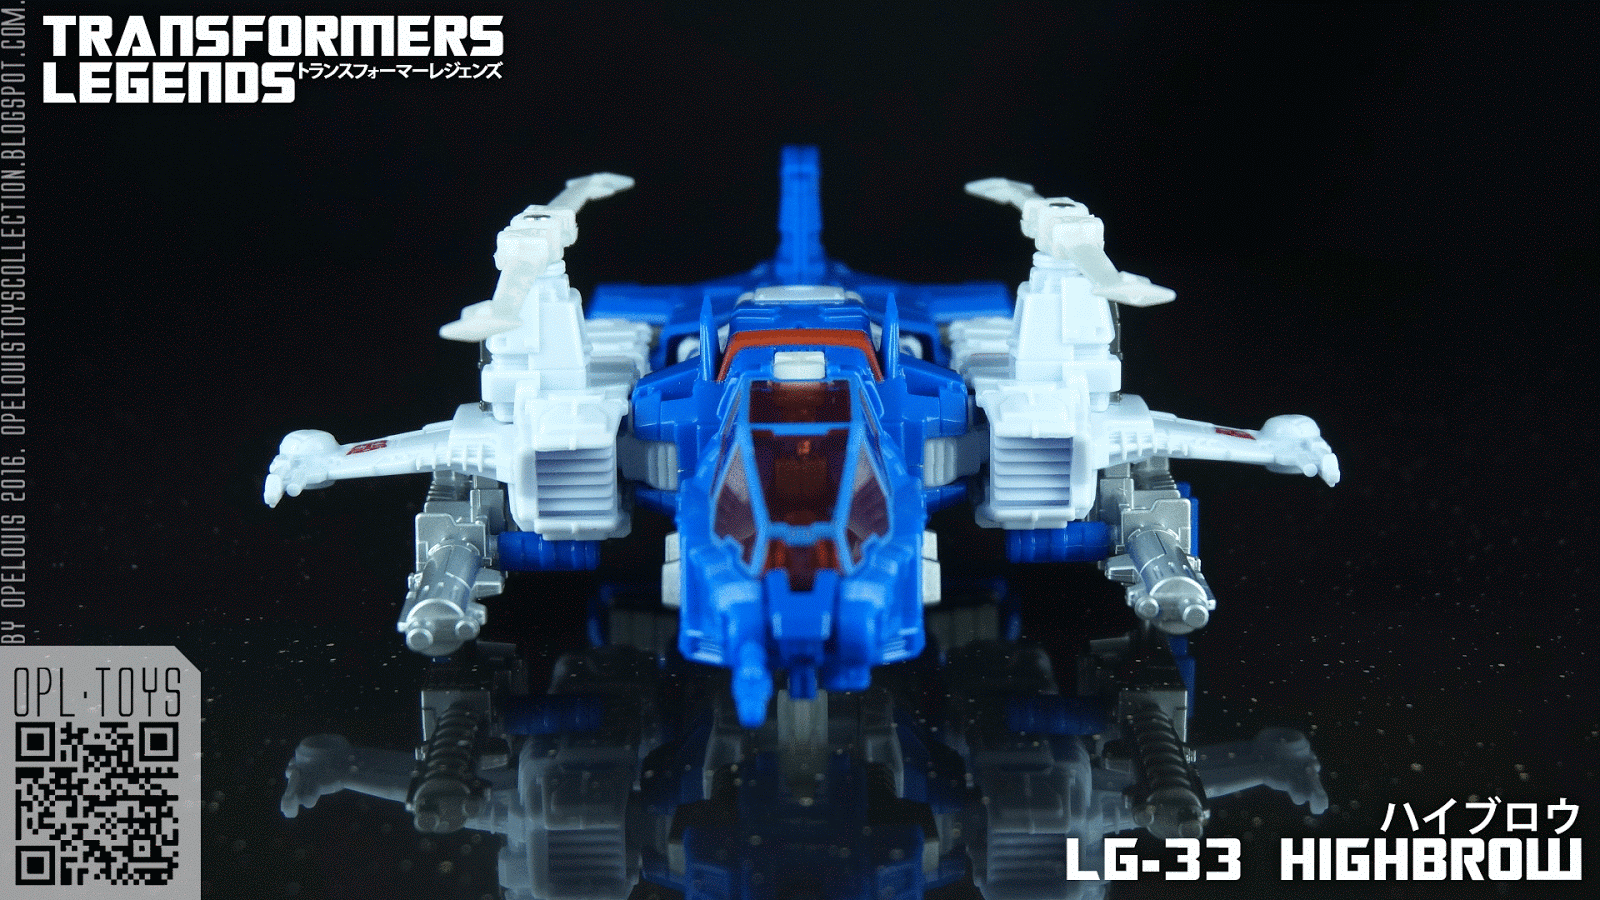 Opelouis's Toys Collection: Takara Transformers Legends, LG-33 Highbrow.